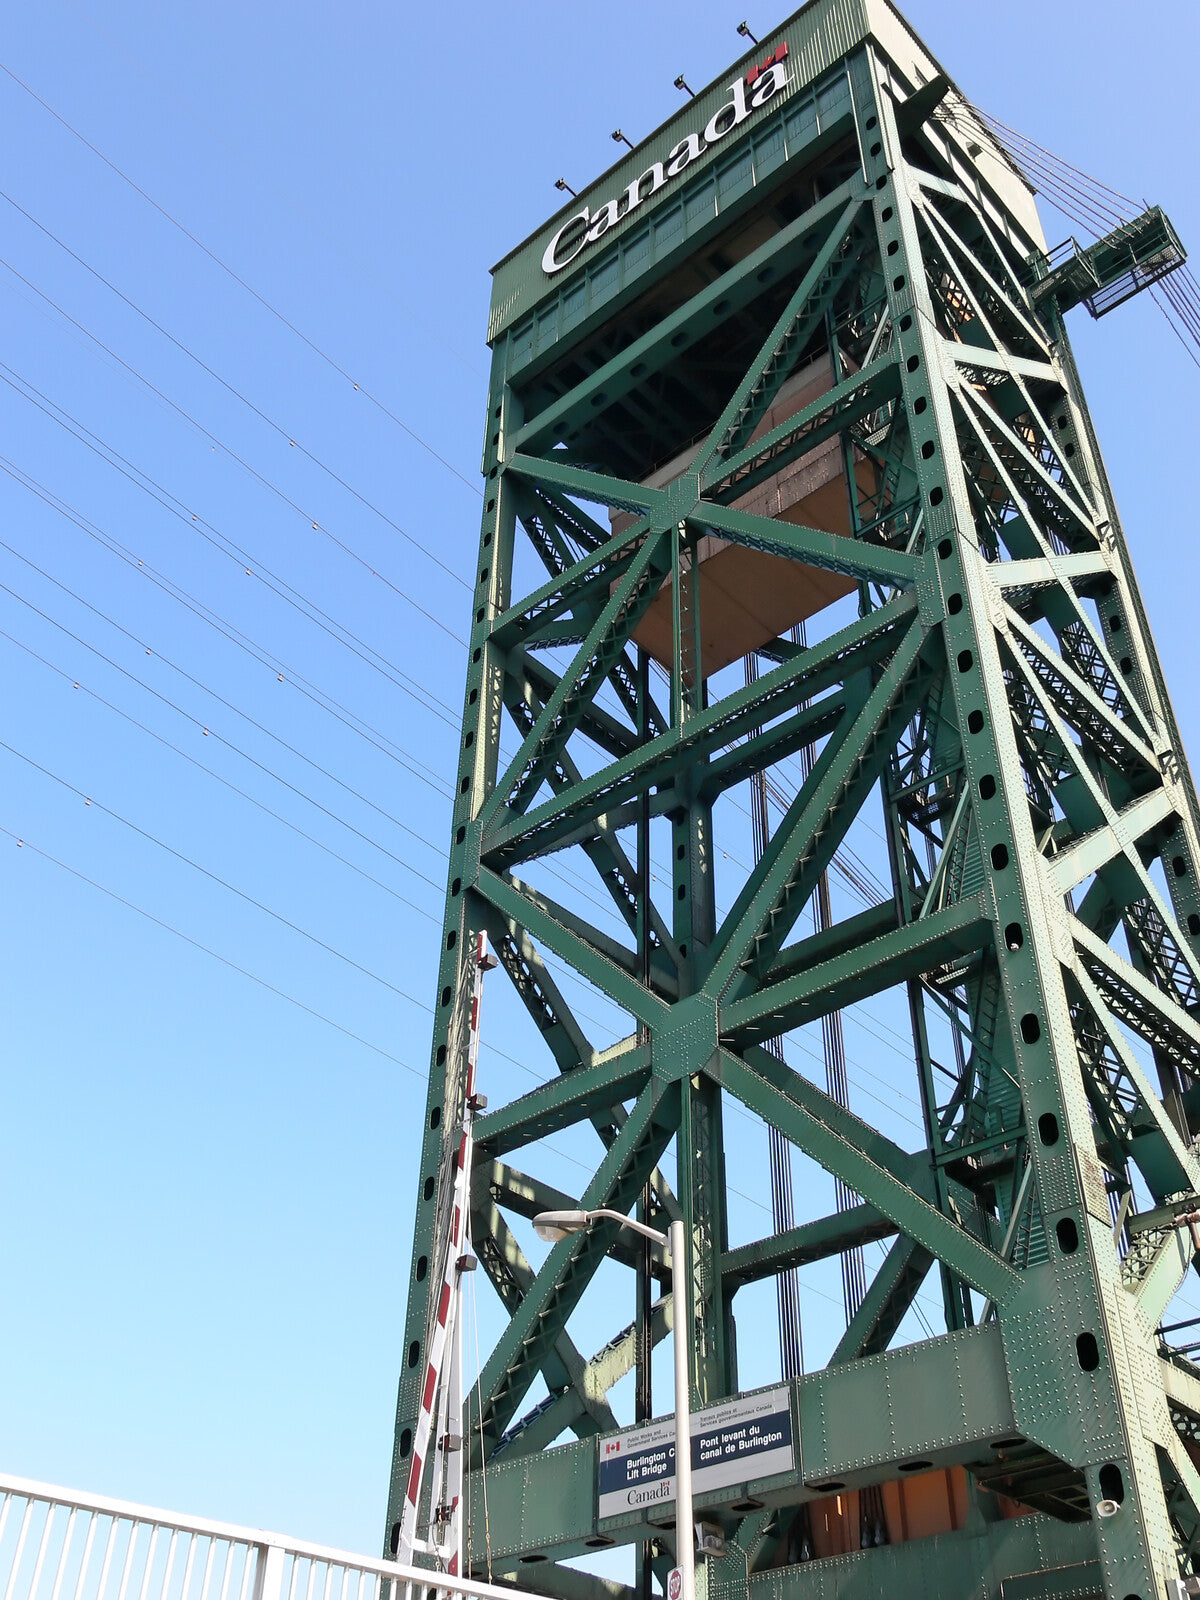 An upward view of the Hamilton Harbors' towering green steel structure of a bridge lift mechanism with 'Canada' written at the top, showcasing industrial engineering against a clear blue sky.